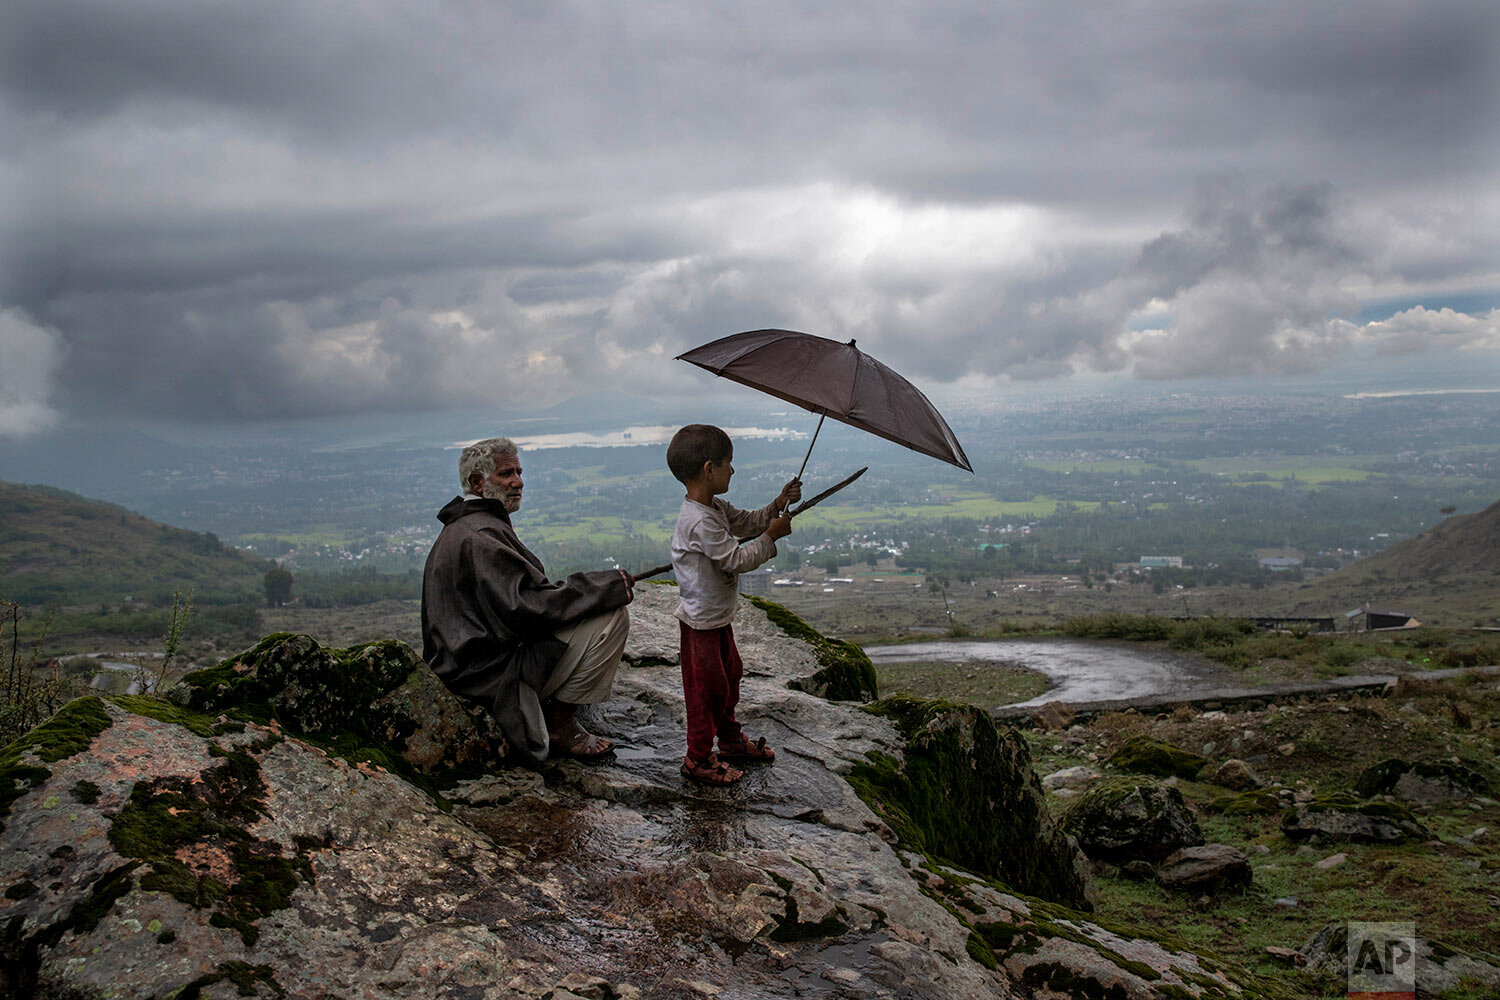  Ali Mohammad, a Kashmiri villager, with his grand son Burhan Ahmed keep a watch on their cattle from a hillock on the outskirts of Srinagar, Indian controlled Kashmir, Monday, Aug. 31, 2020. (AP Photo/ Dar Yasin) 